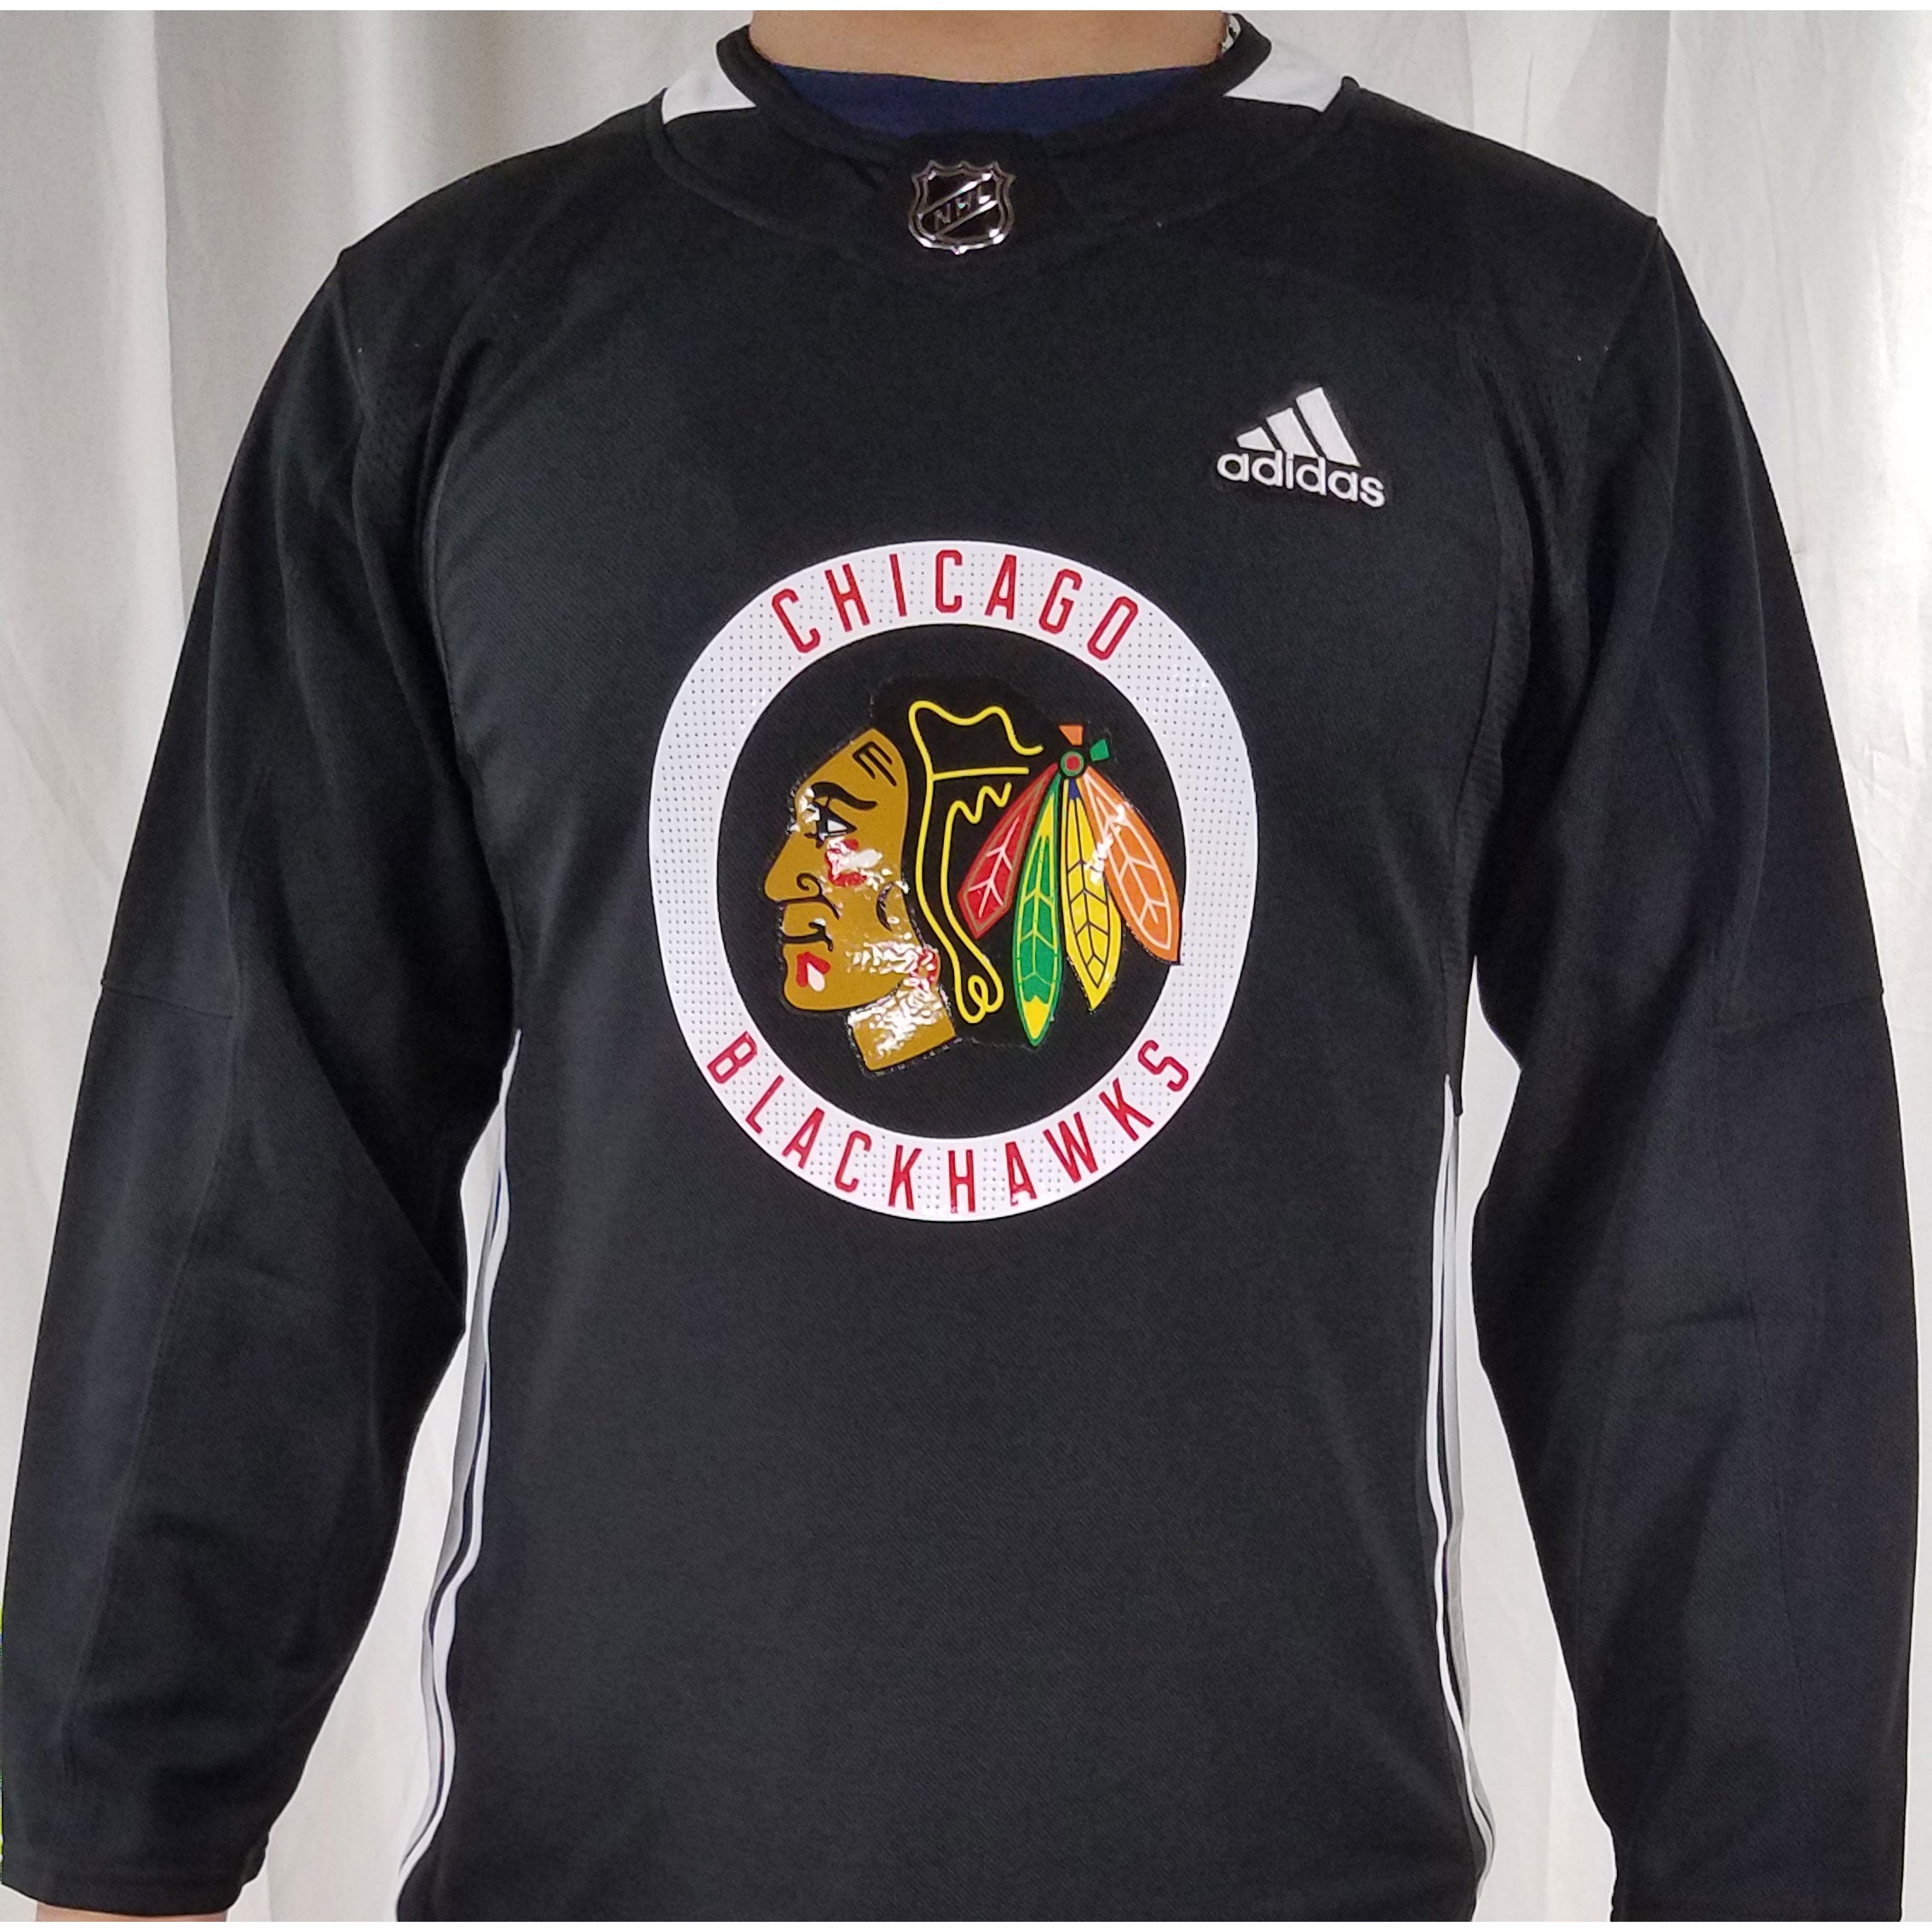 New Chicago Blackhawks red Adidas EXTRA LARGE Practice Jersey size (54) mens